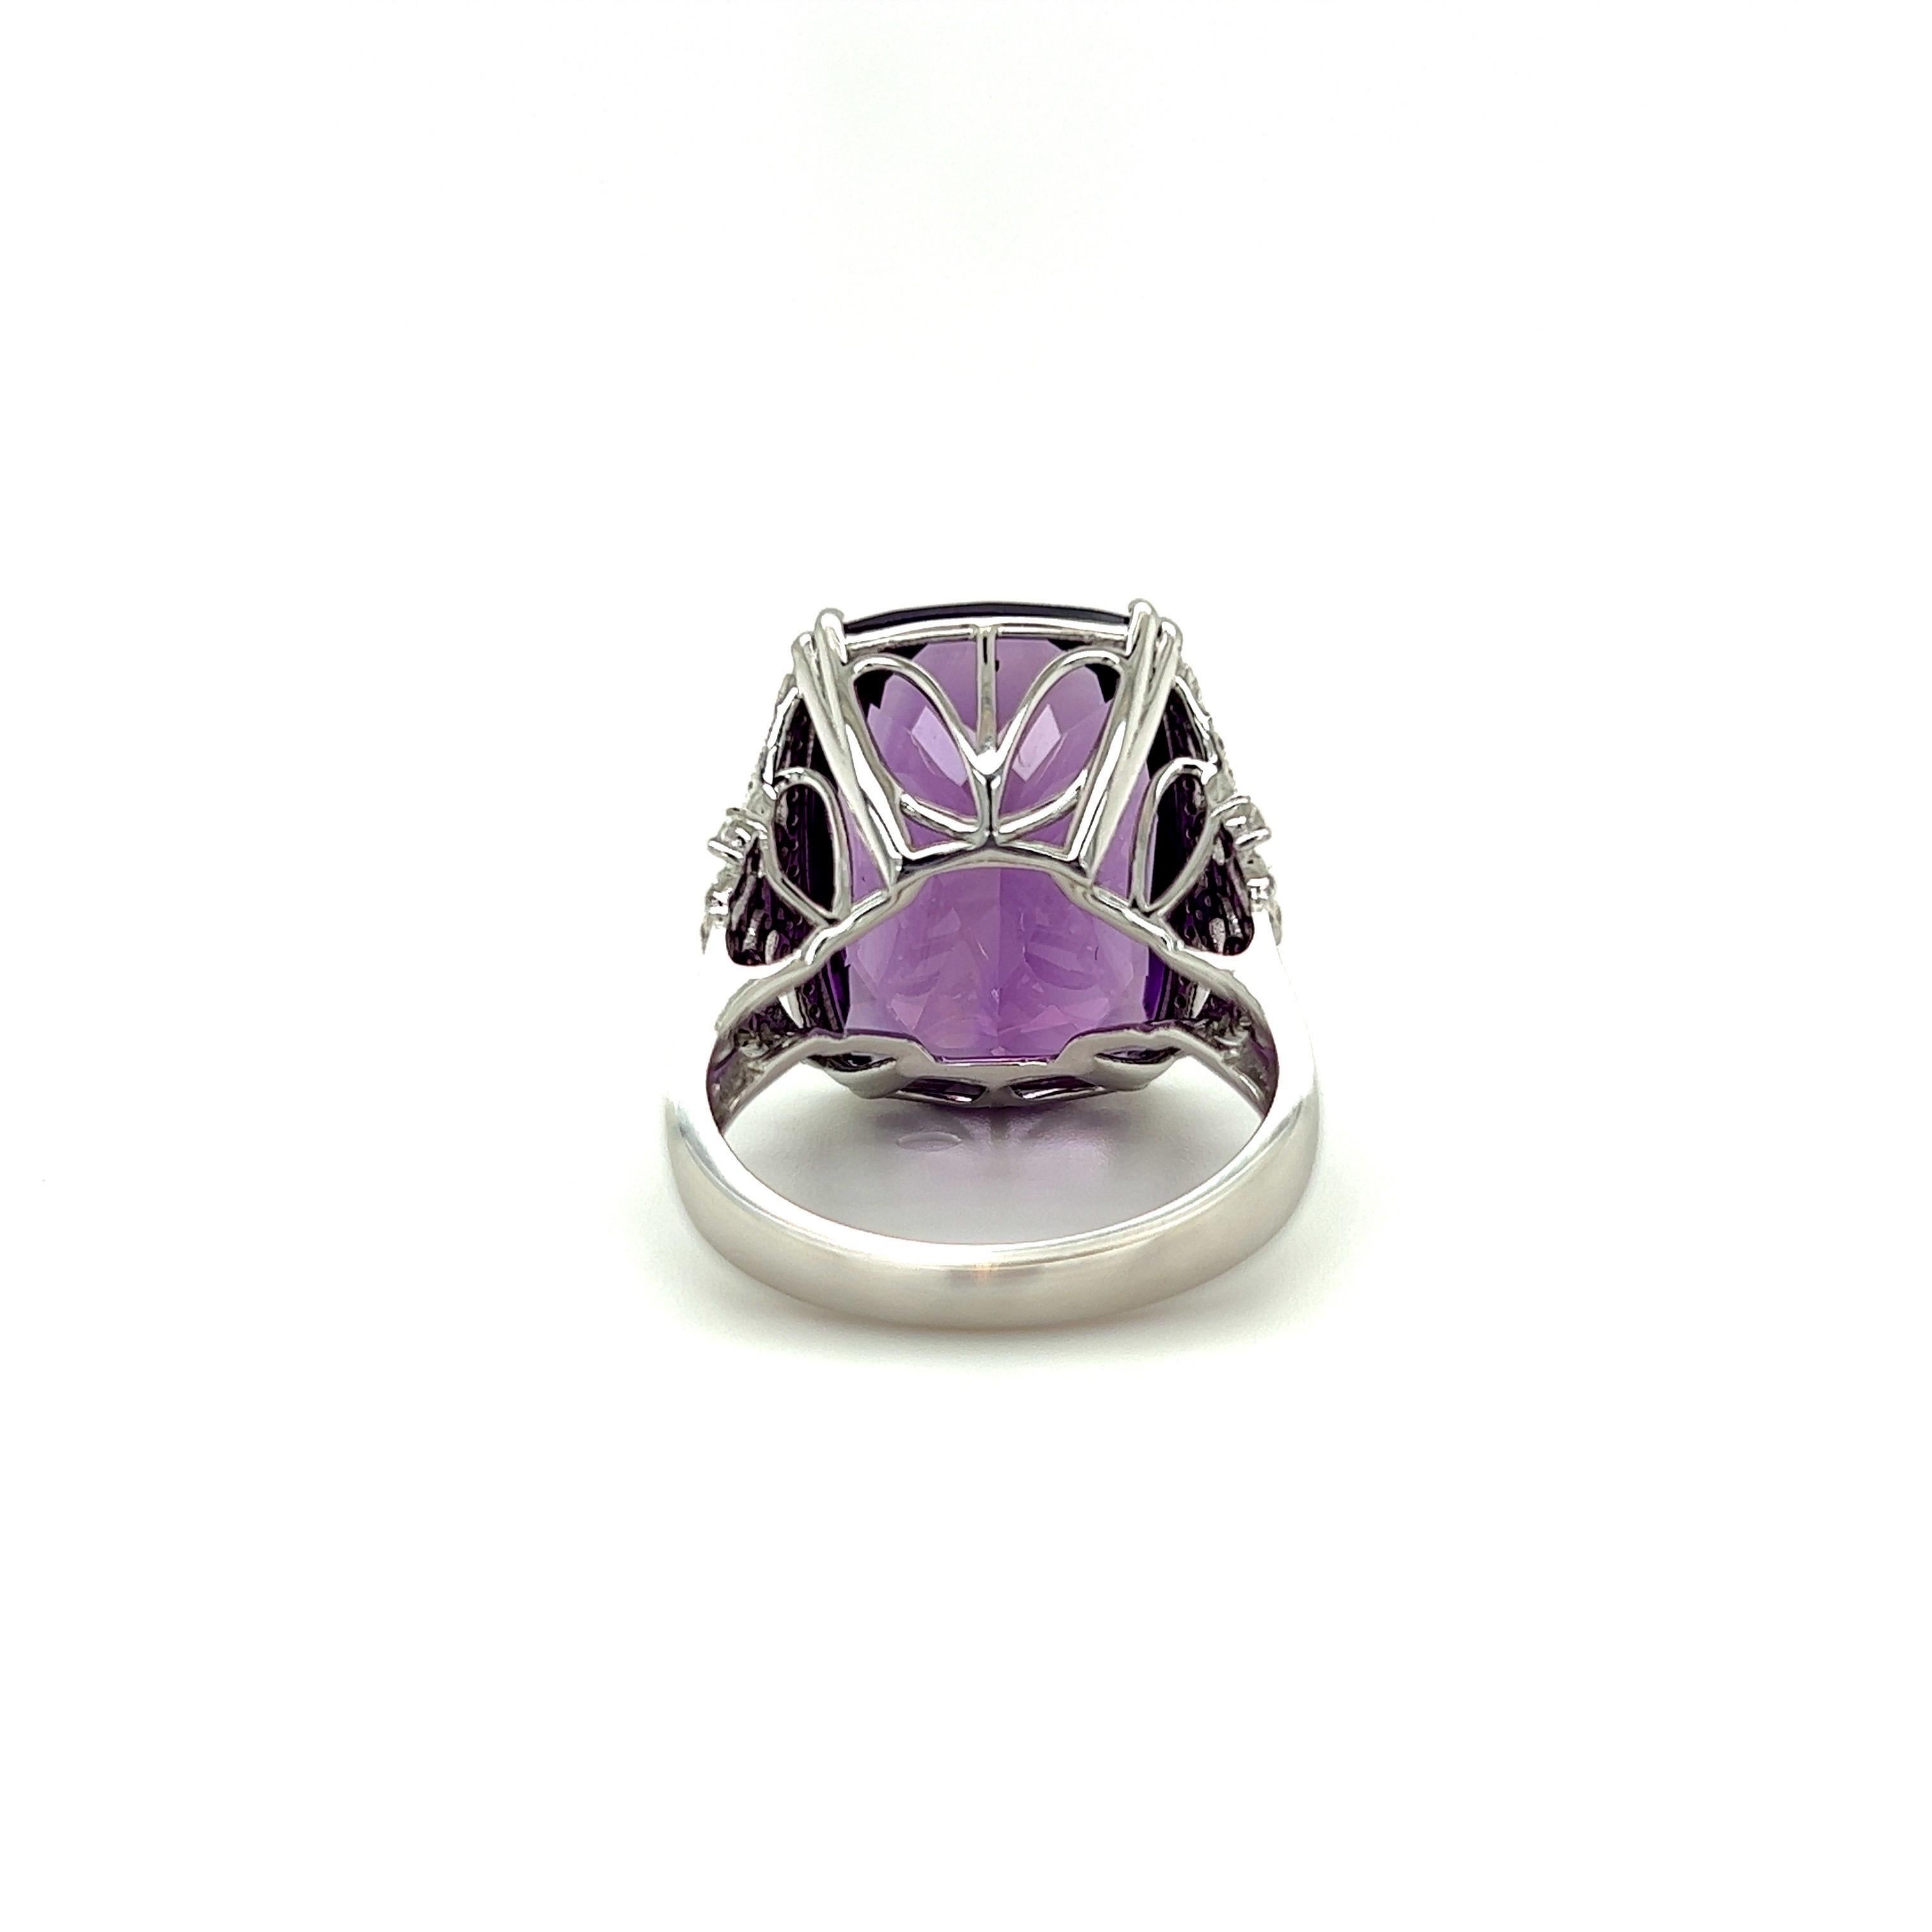 Contemporary 15.91 Carat Amethyst Cocktail Ring For Sale